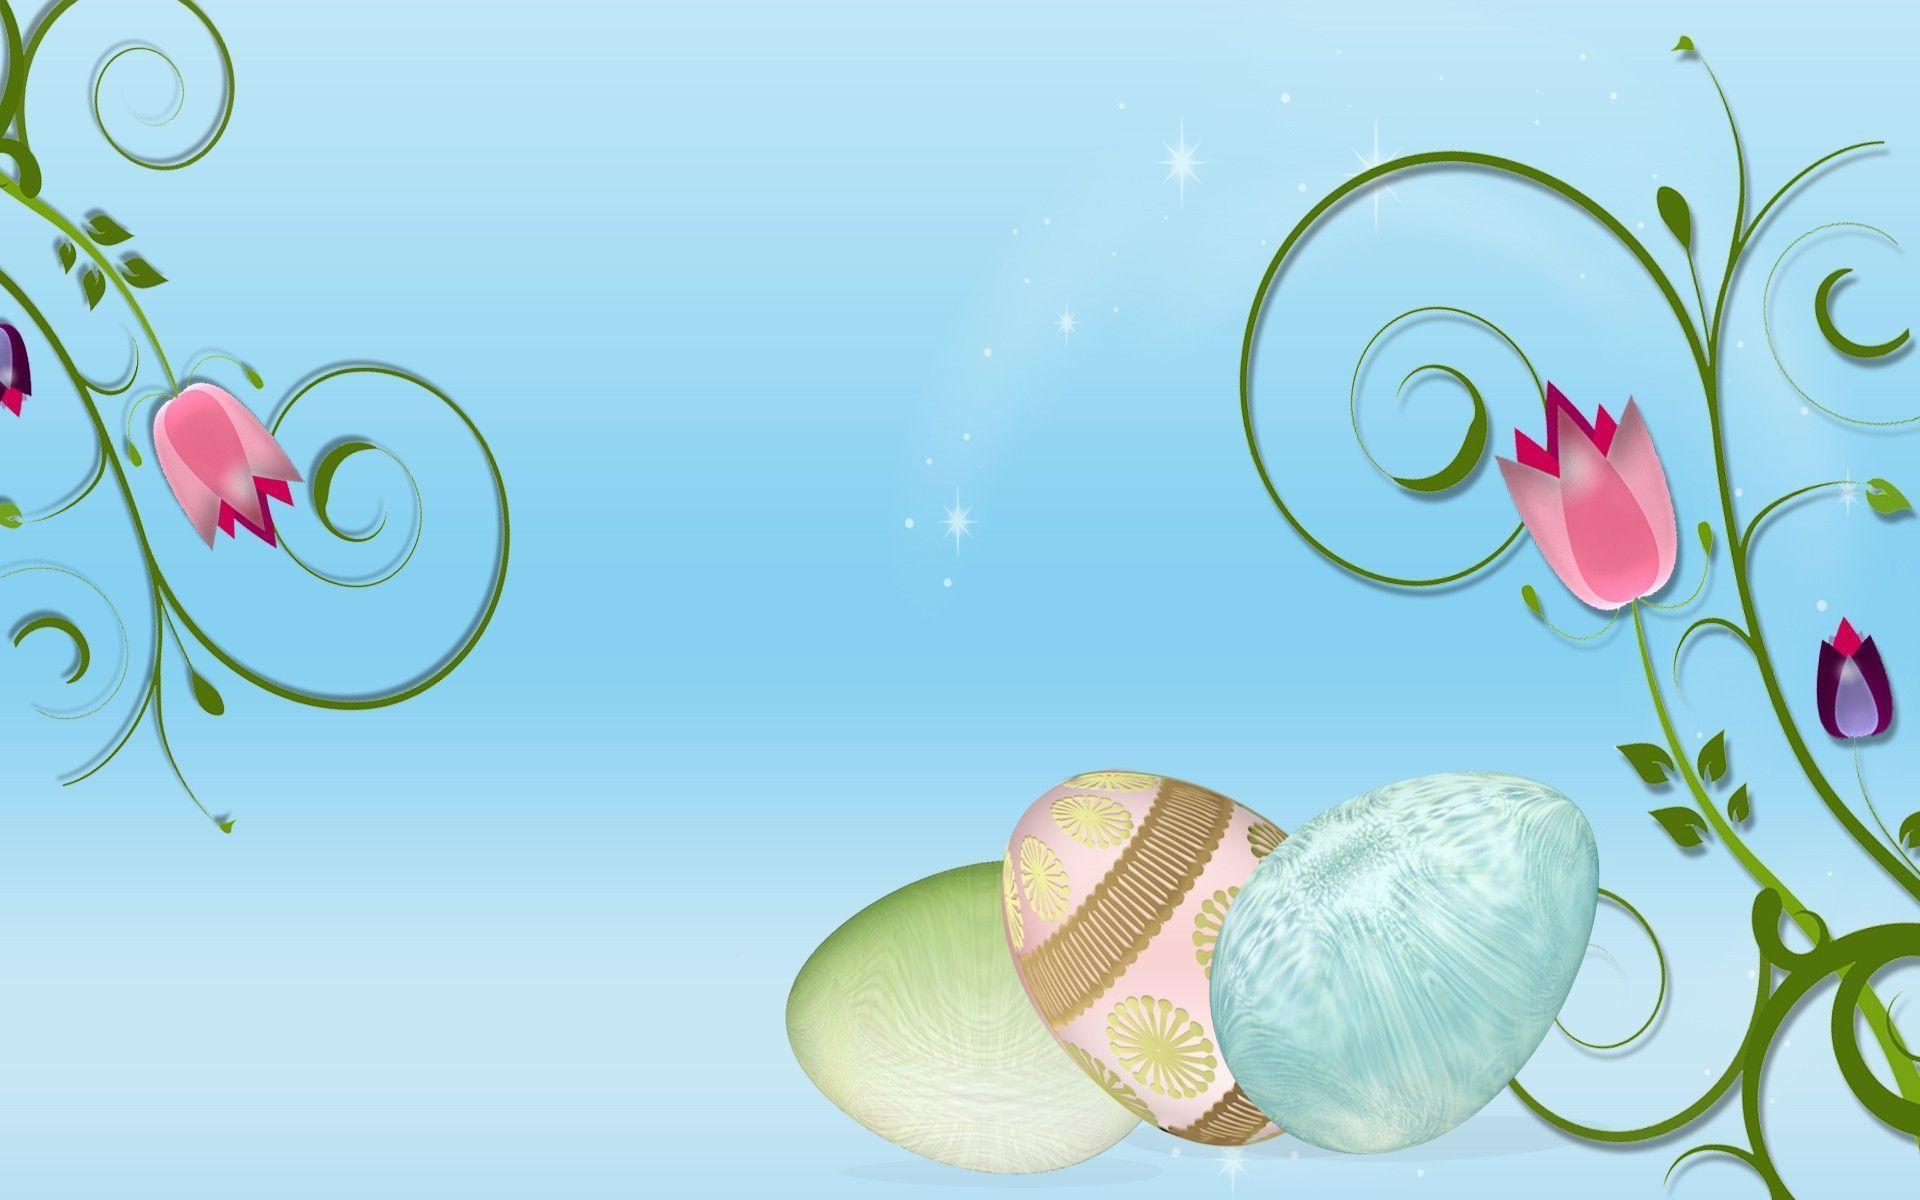 Happy Easter Wallpapers